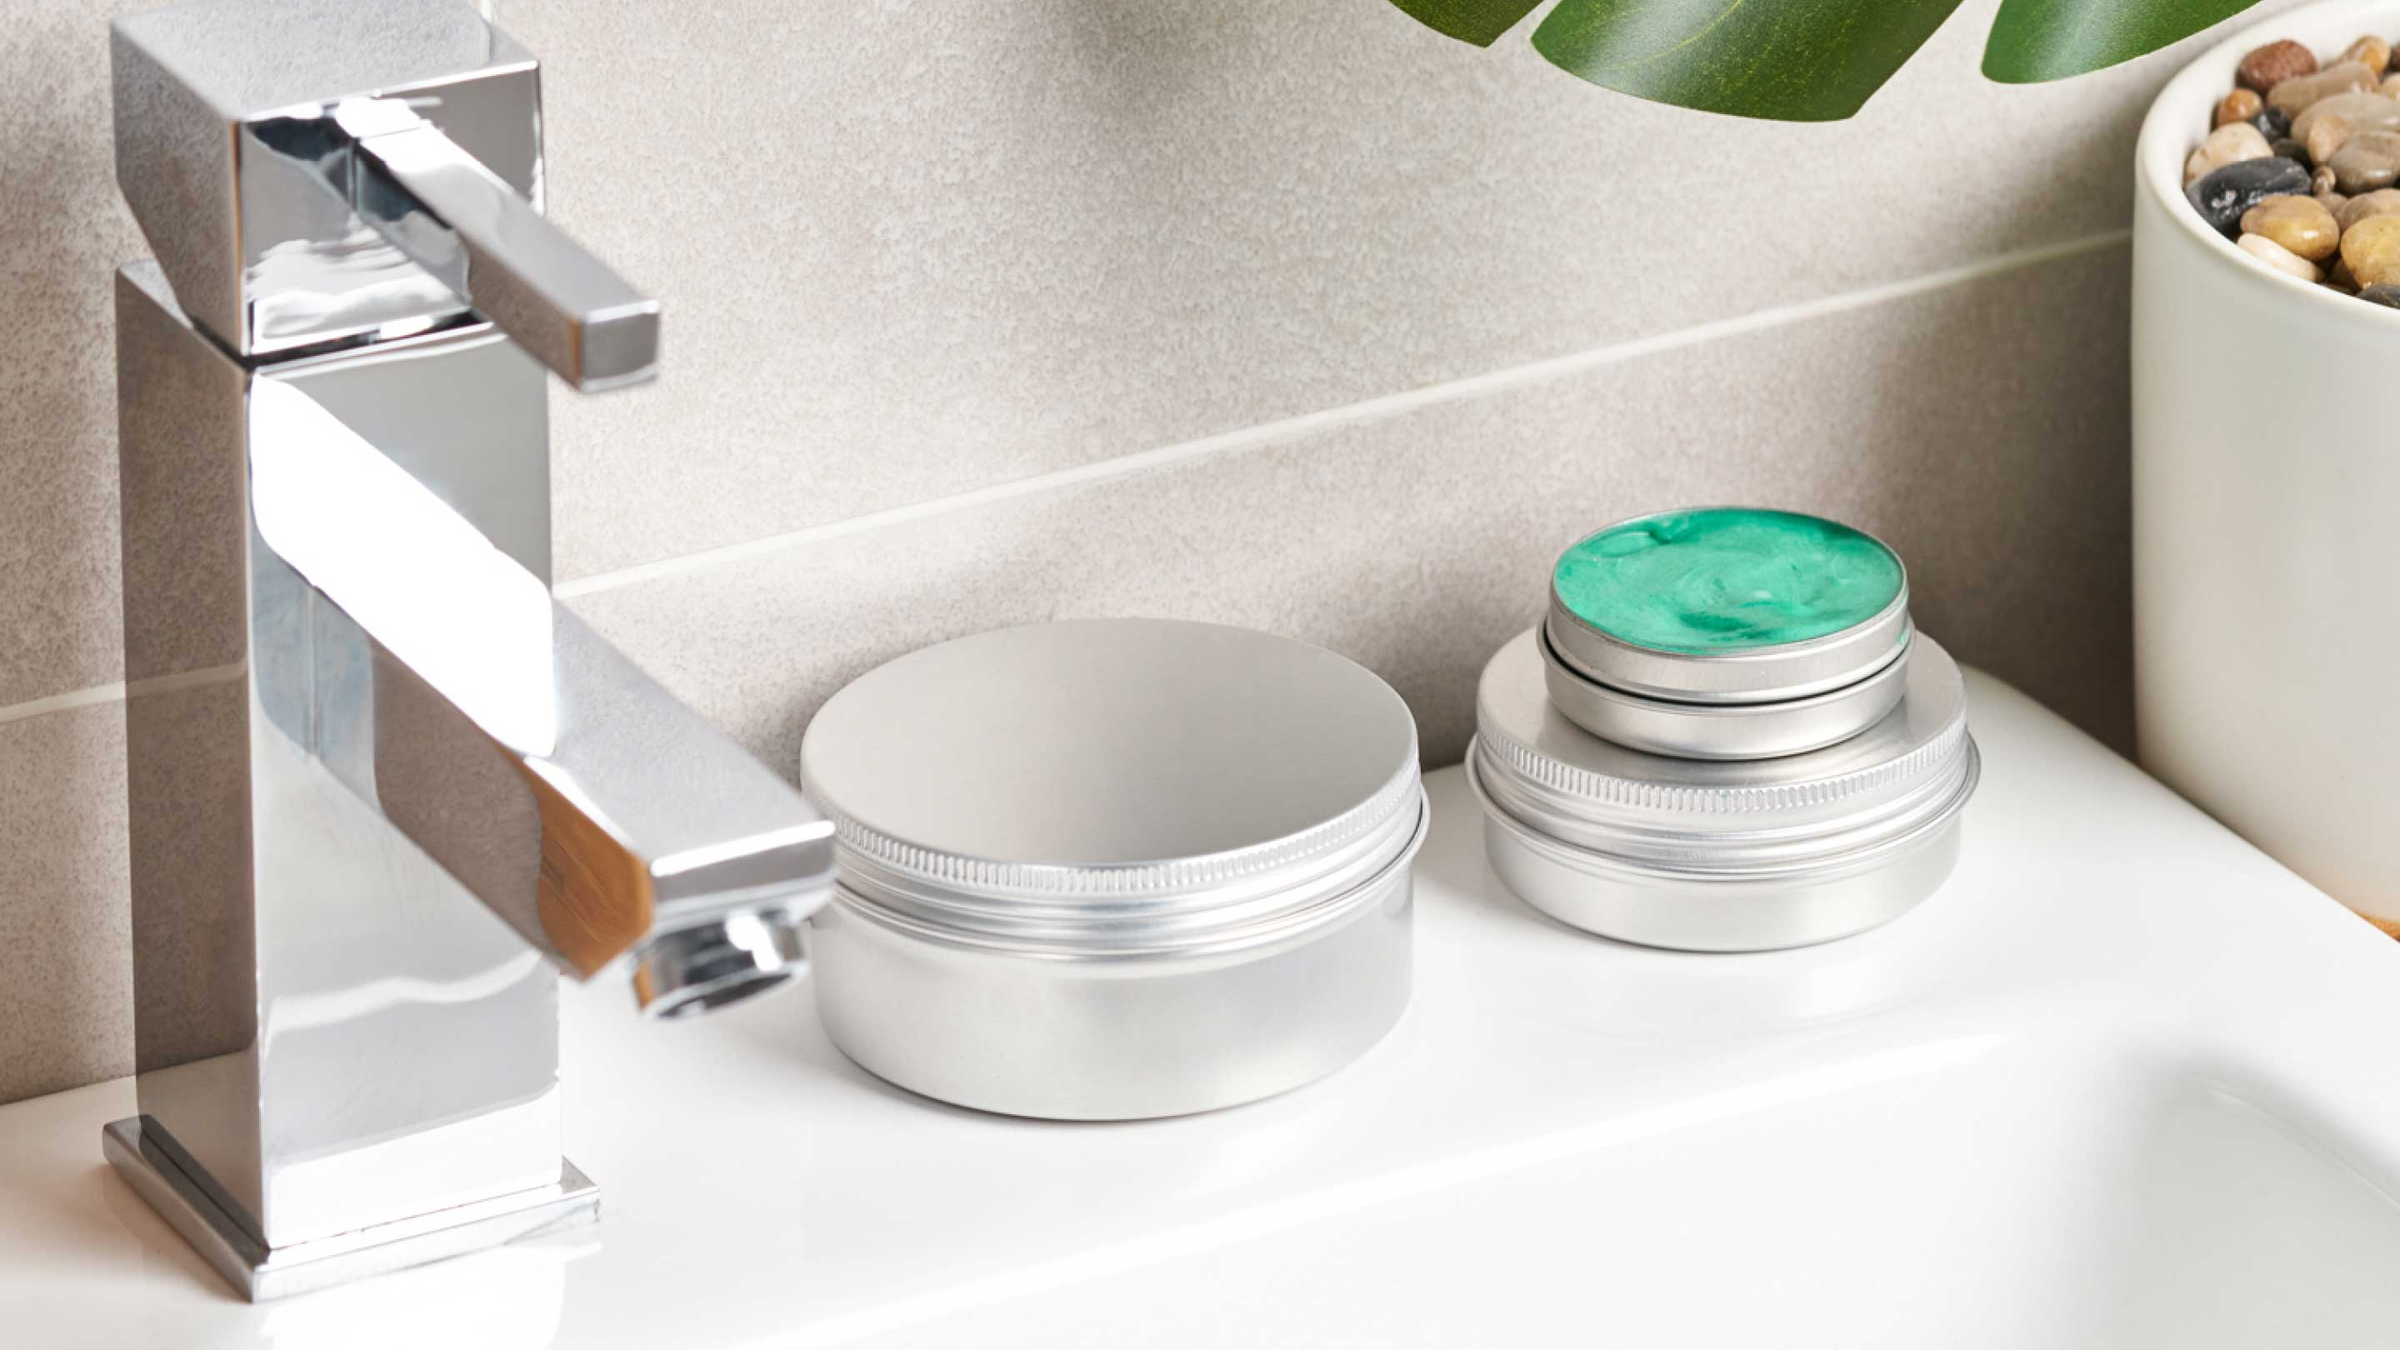 Aluminium box packaging with cosmetics inside in a bathroom.